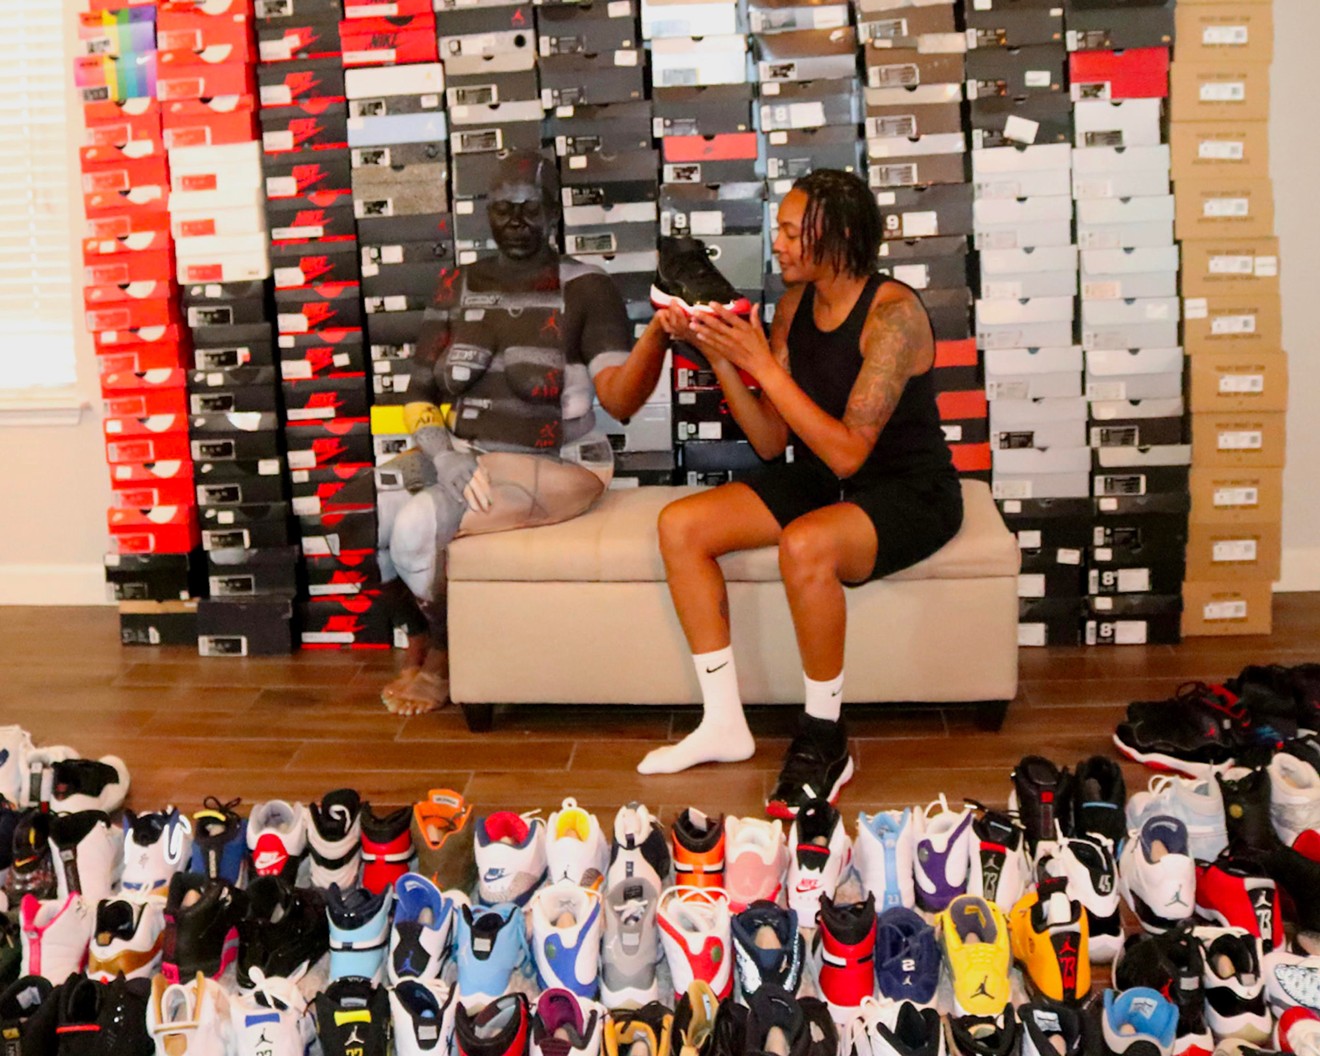 Wife is blended into her Wife’s Sacred collection of sneakers